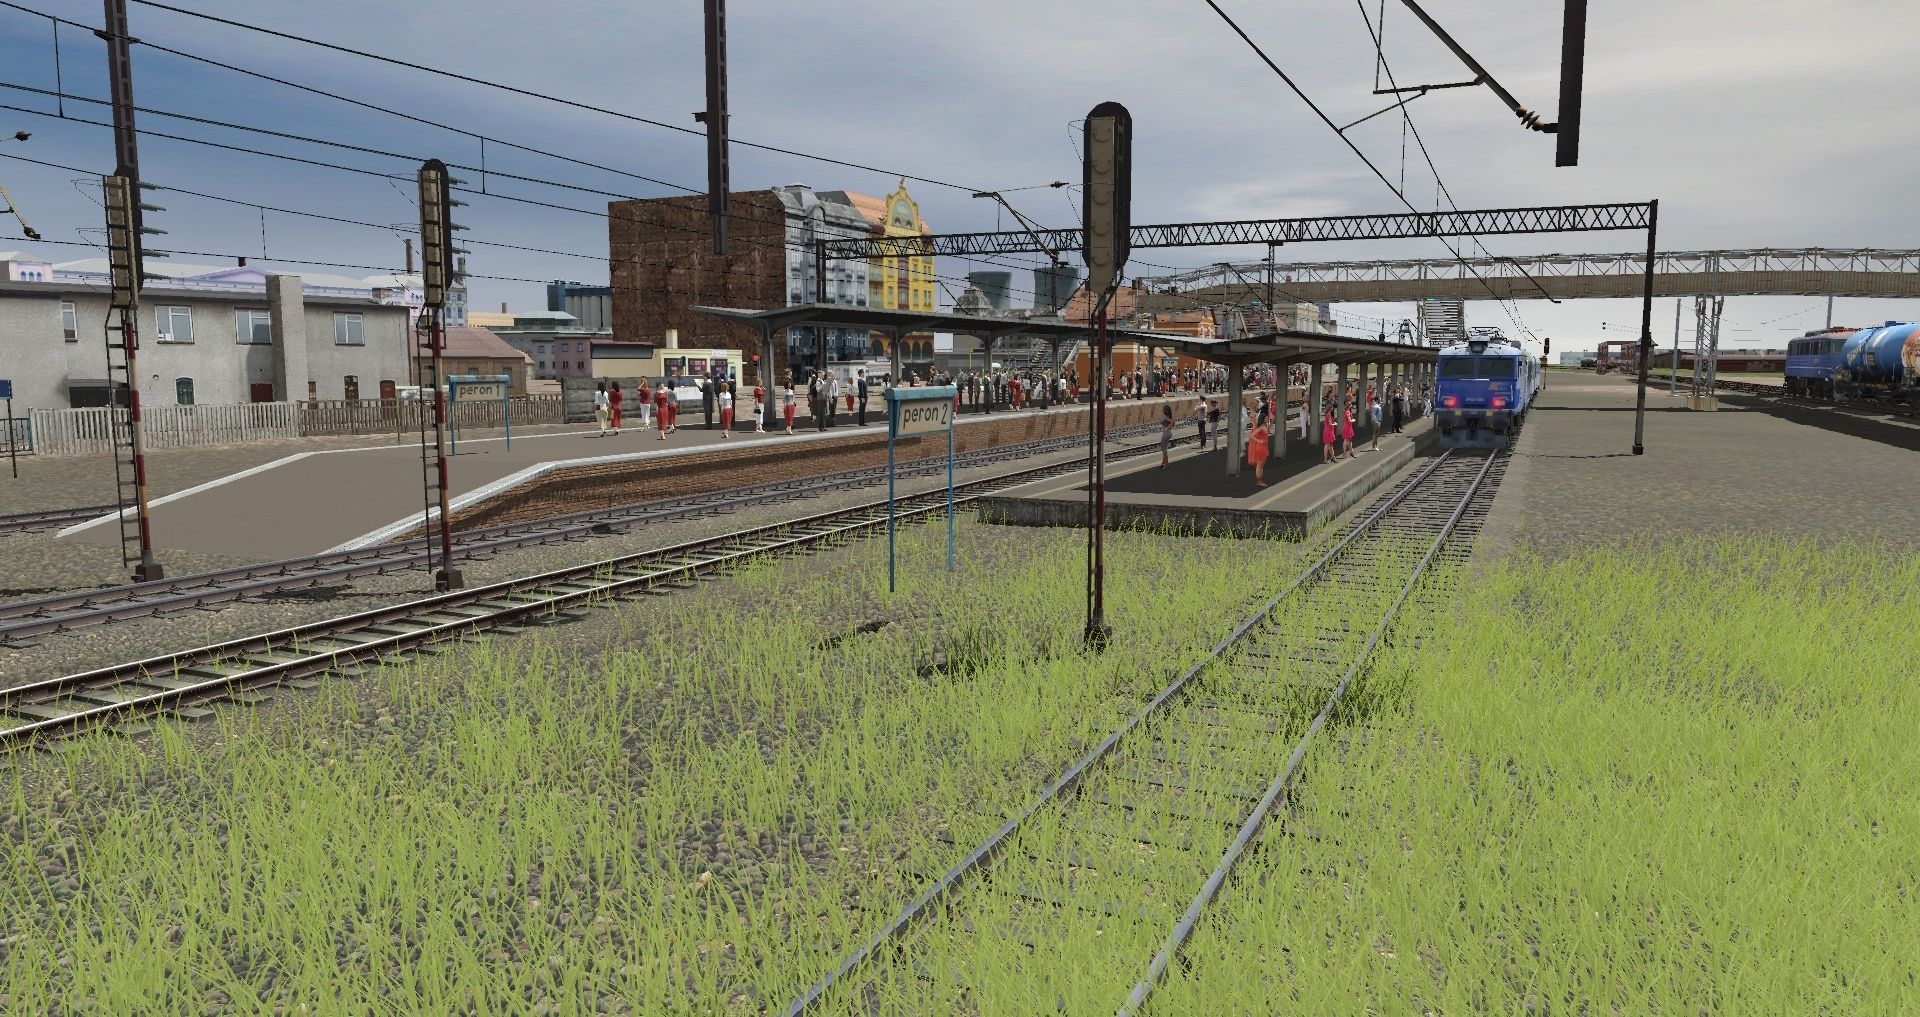 WIP-at-Stare-Miasto-station-in-my-fictional-Polish-city%2C-electrification-is-underway..jpg